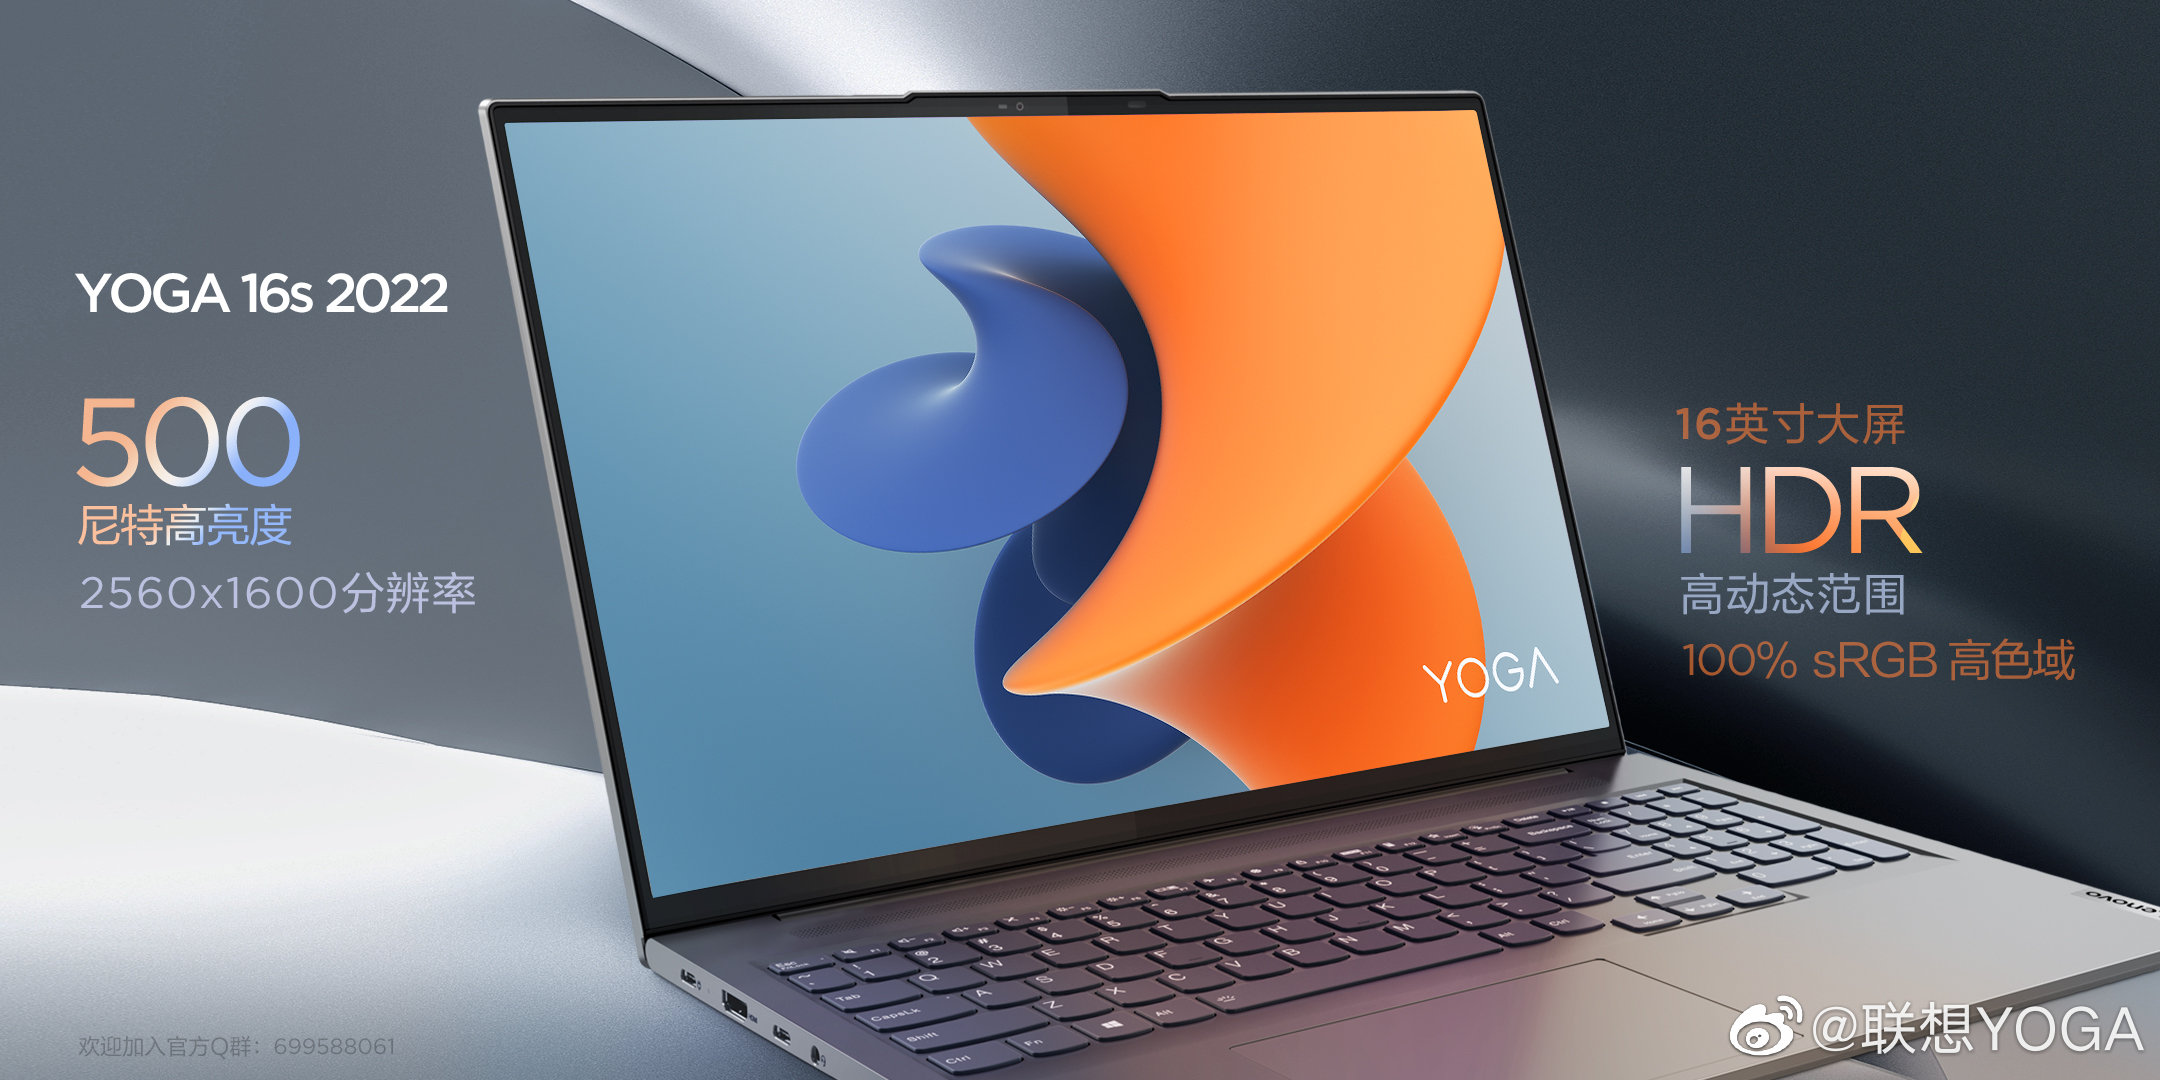 Lenovo YOGA 16s with 16-inch Slim-bezel display announced in China